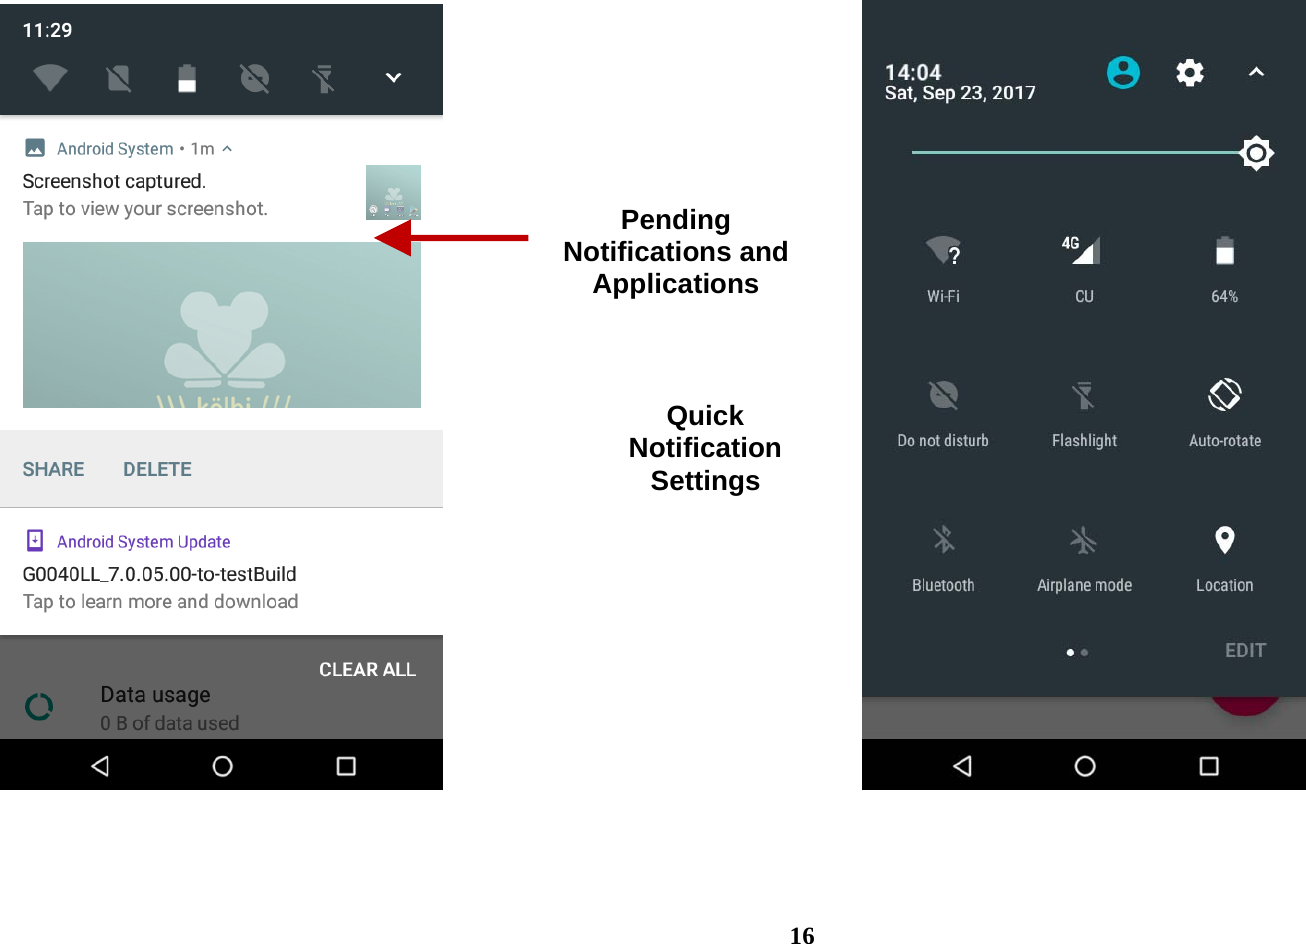  16                     Pending Notifications and Applications Quick Notification Settings 